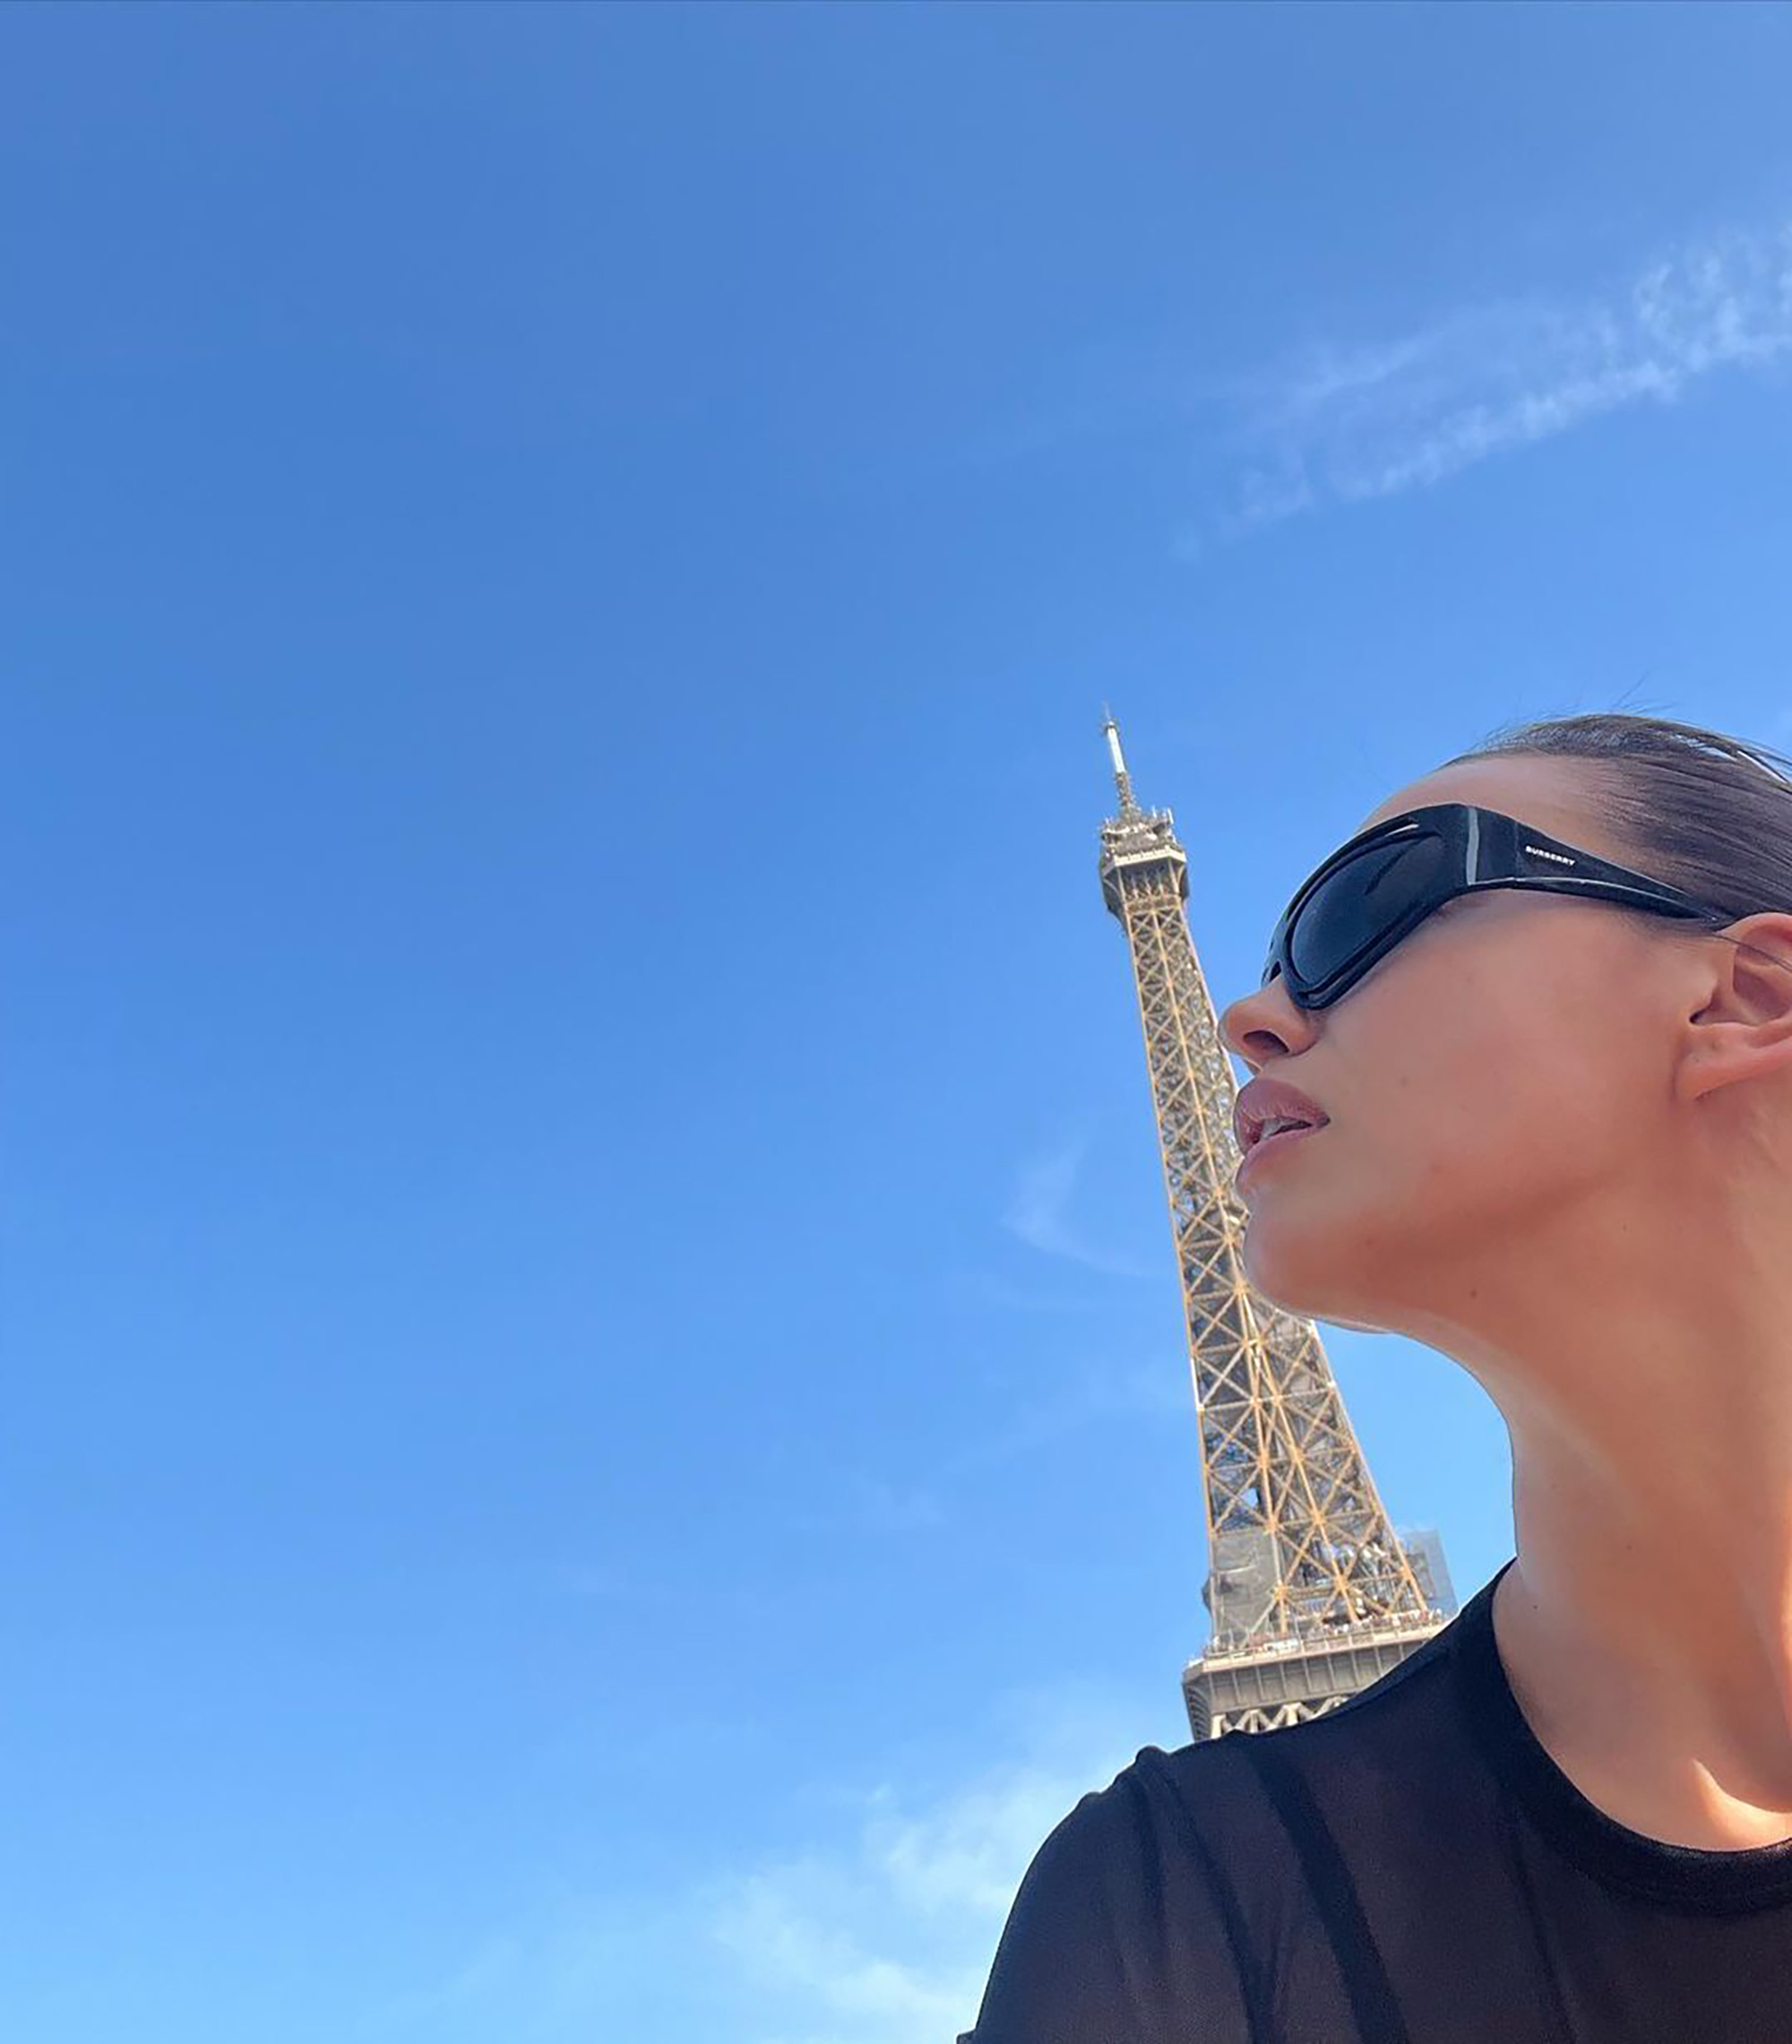 Irina Shayk snaps an artistic selfie in front of the Eiffel Tower.